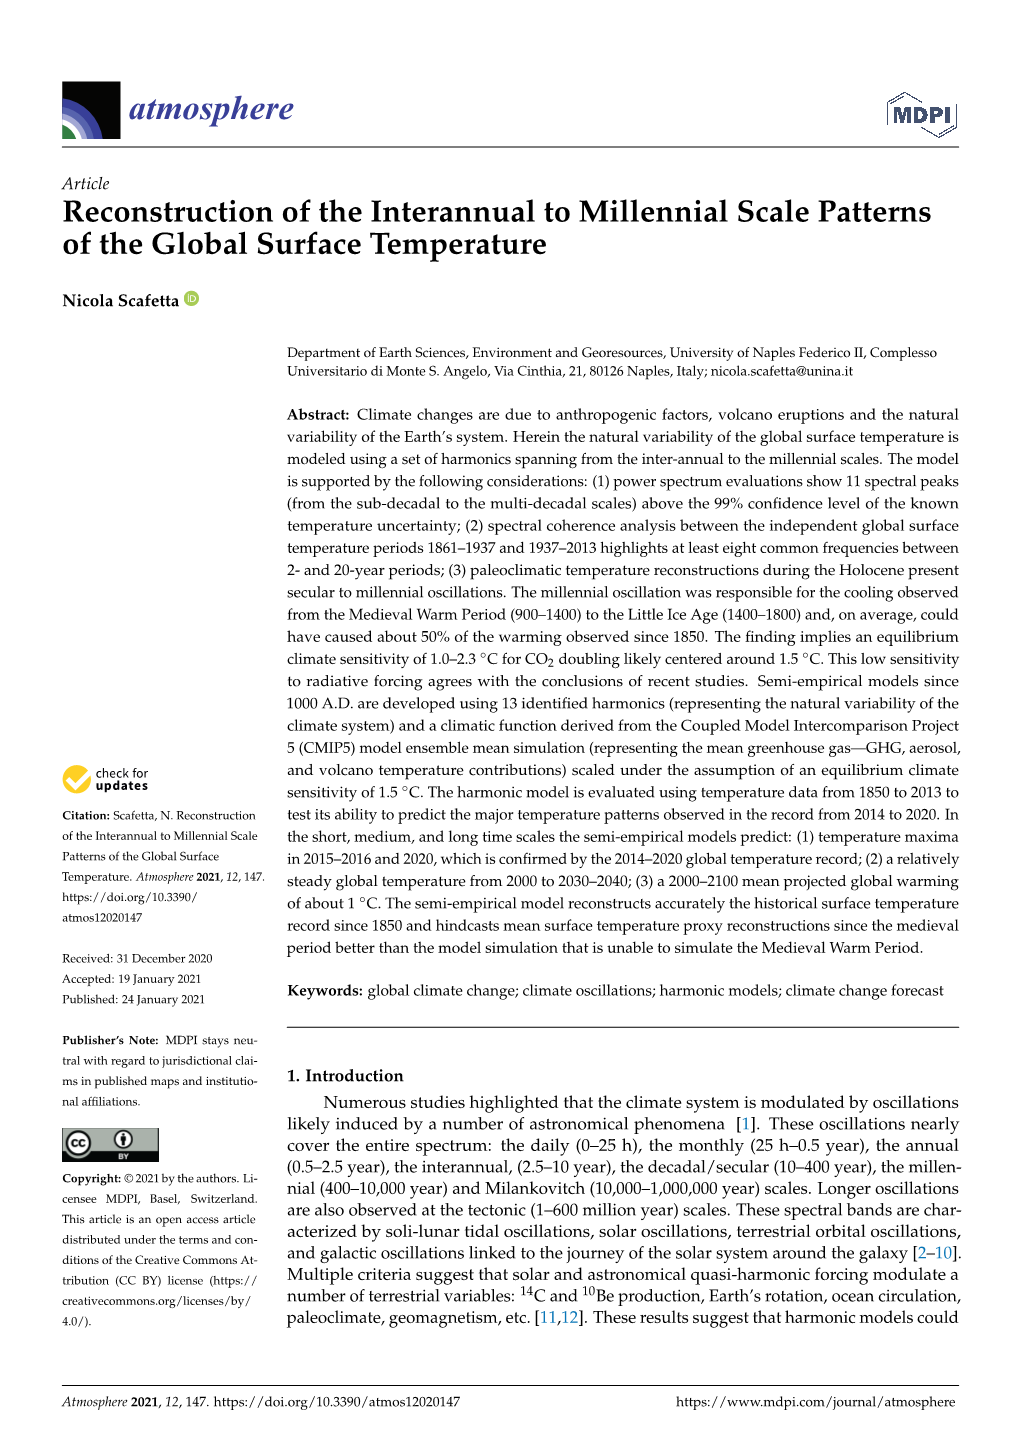 Reconstruction of the Interannual to Millennial Scale Patterns of the Global Surface Temperature